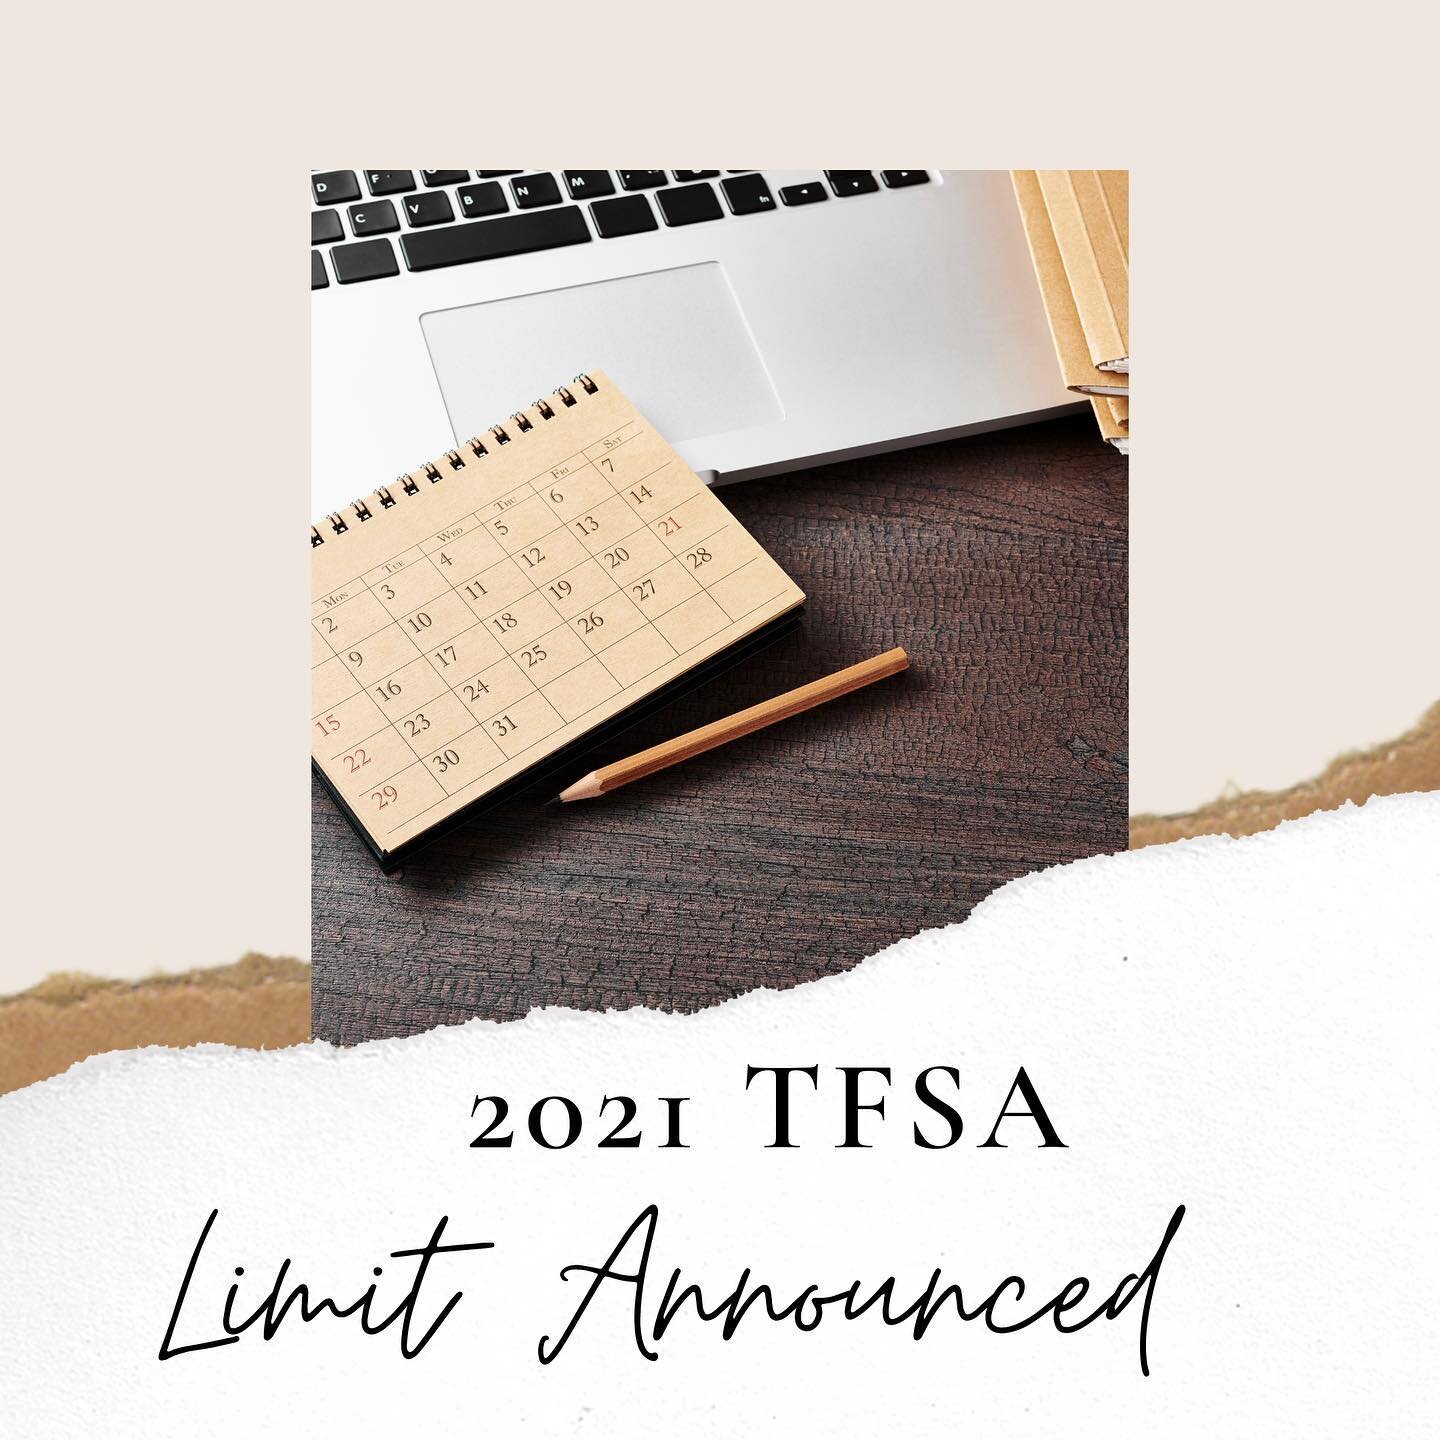 The TFSA contribution limit for 2021 has been officially released. That limit is $6,000, matching the amount set in 2019 and 2020. Federal Tax brackets have also been updated. Click the link in my bio for more information.

.
.
.
.
.
.
.
.
#dbwealth 